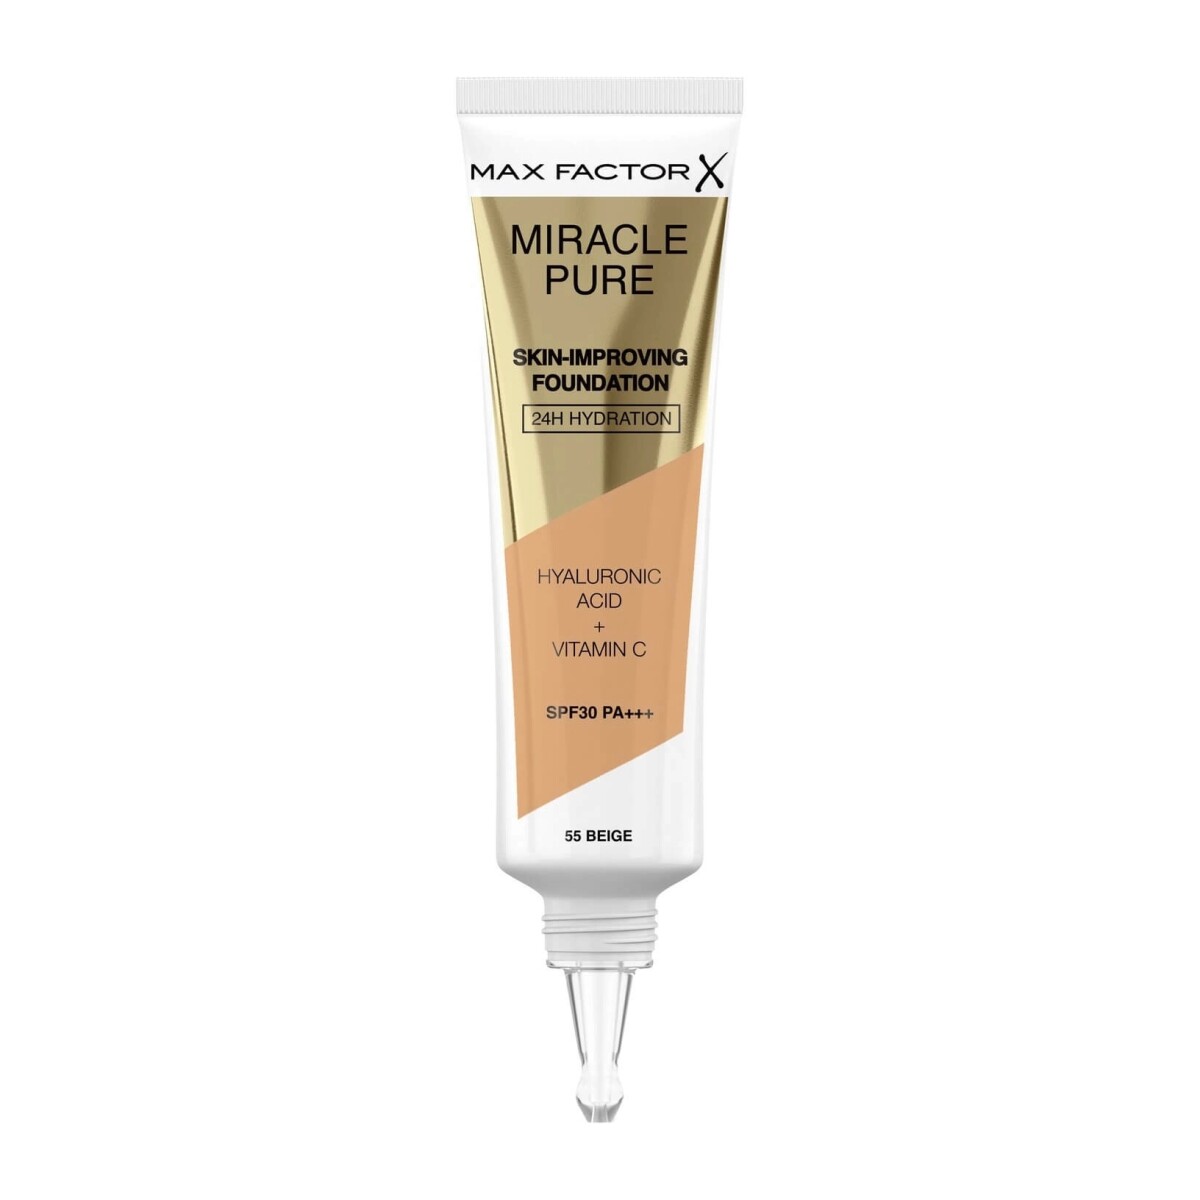 Mf Miracle Pure Foundation Beige #55 